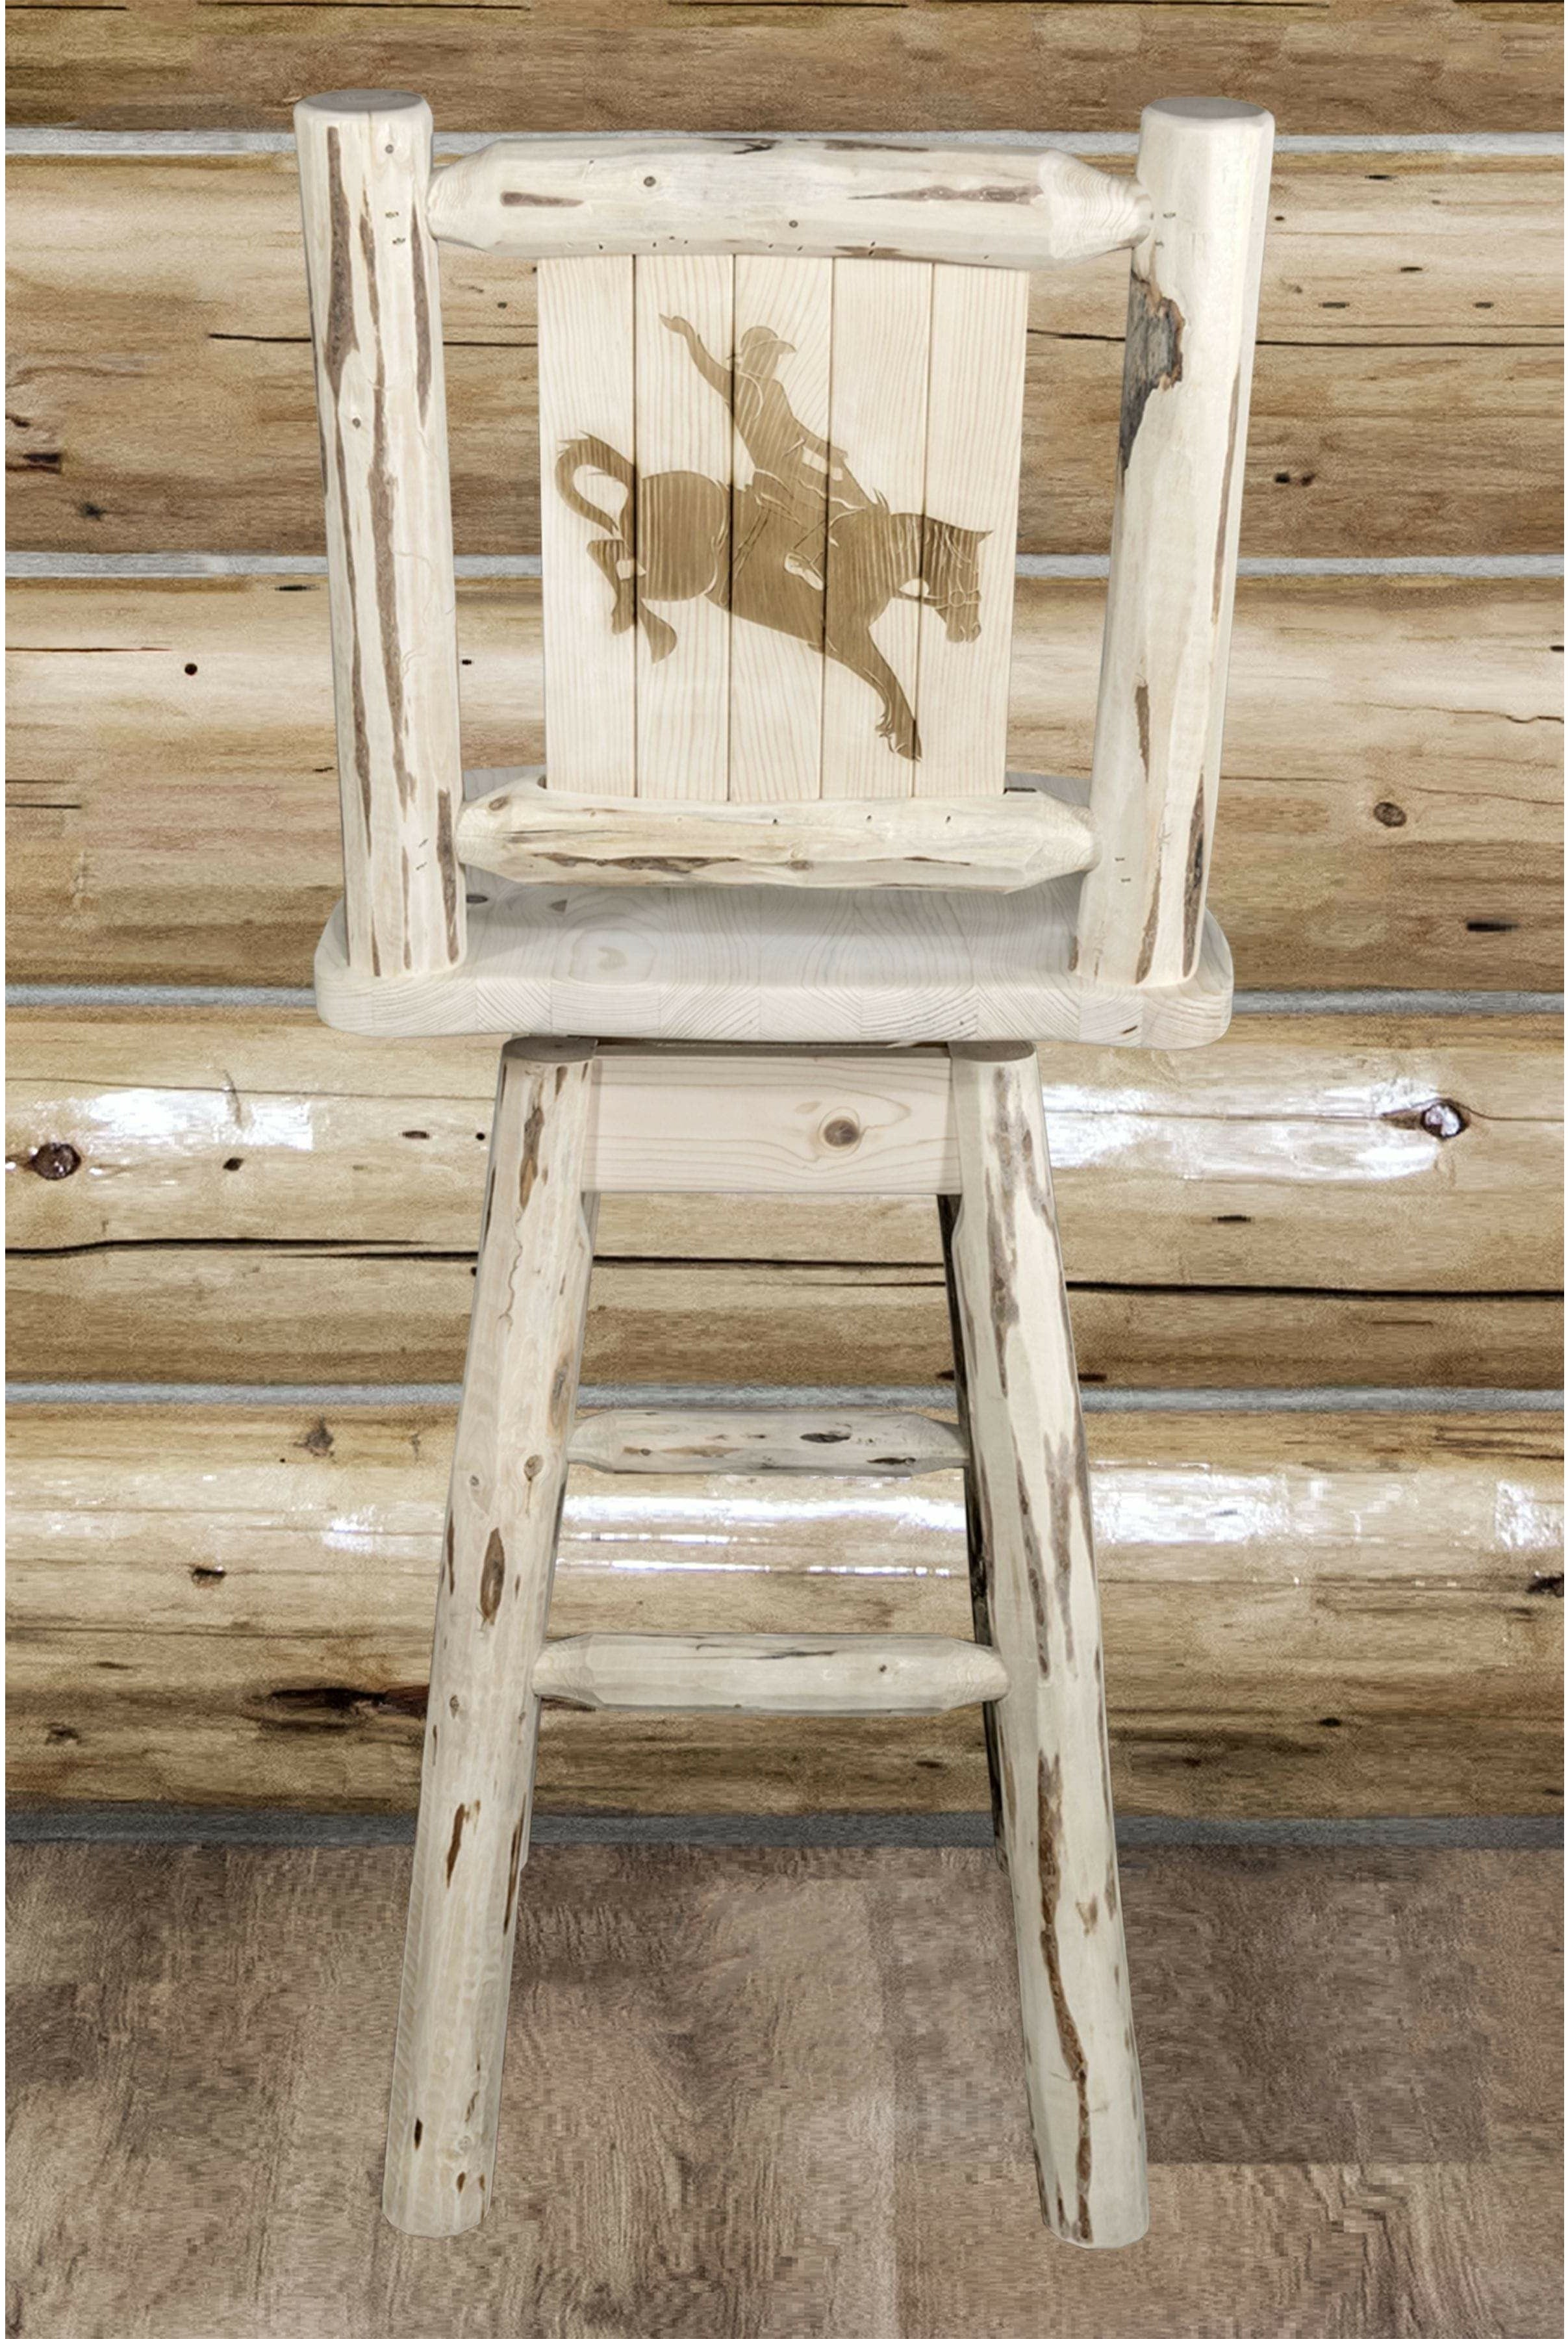 Montana Woodworks Montana Collection Counter Height Barstool with Back & Swivel and Laser Engraved Design - Clear Lacquer Finish-Rustic Furniture Marketplace